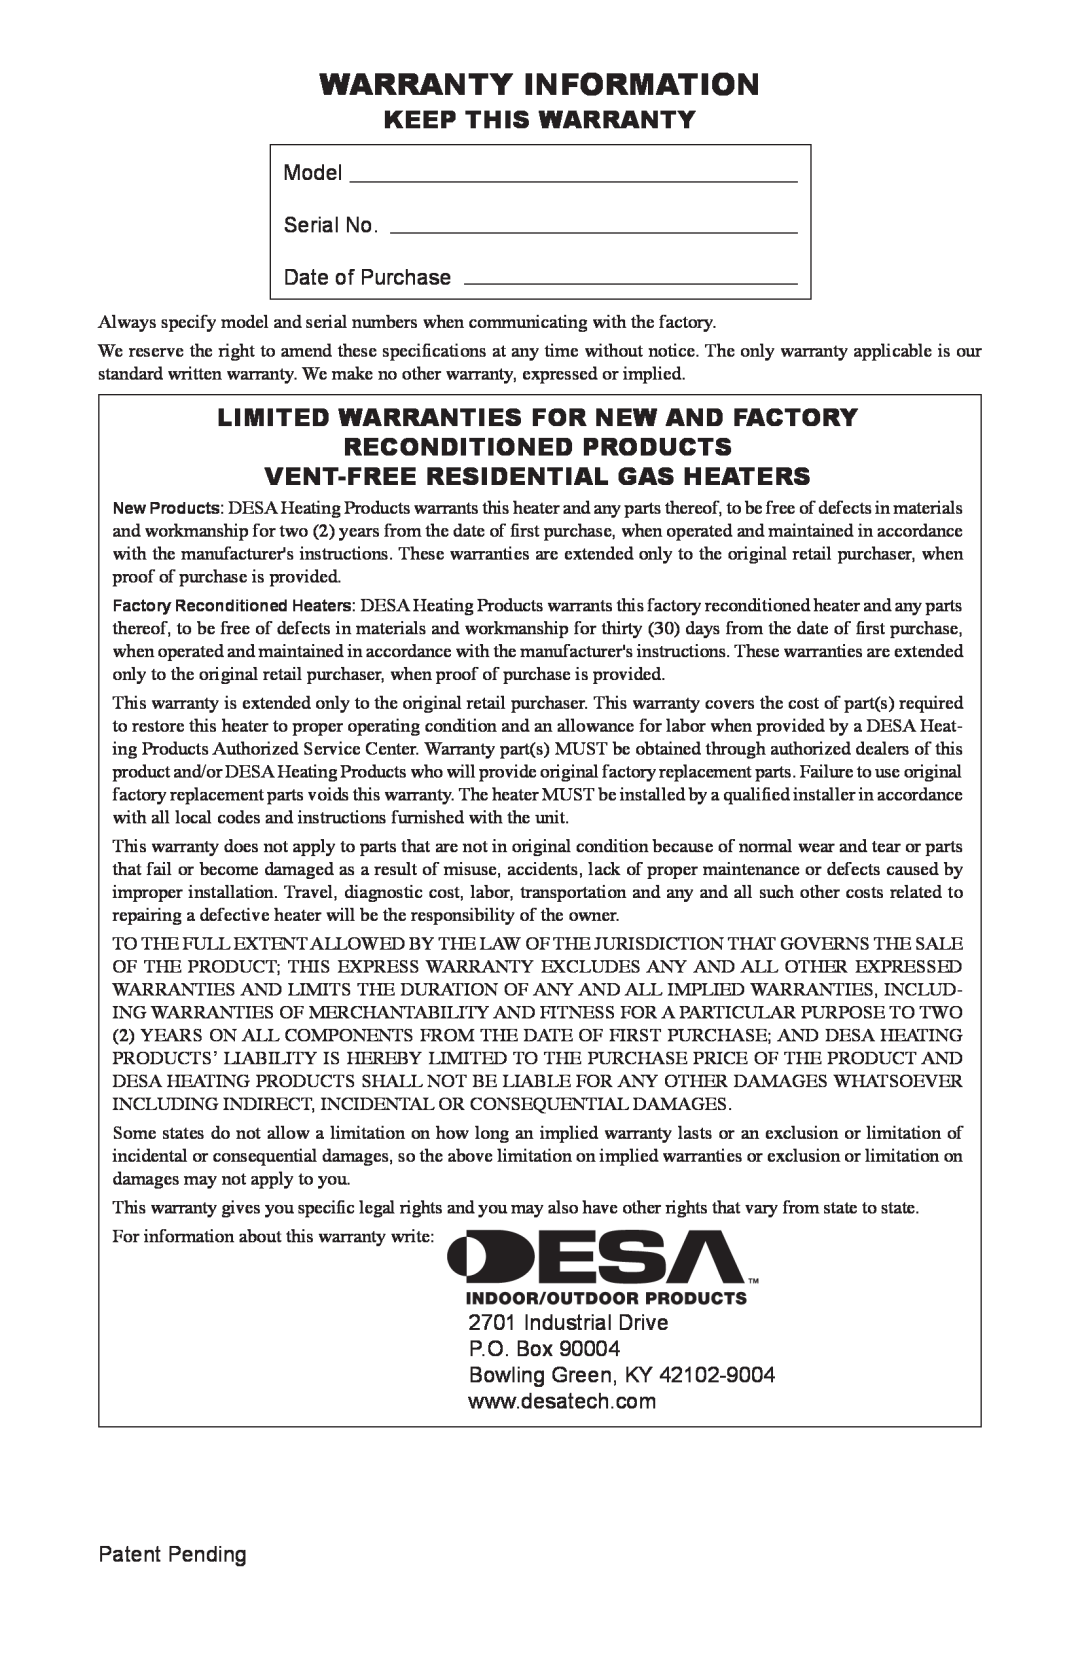 Desa VSL18PT Warranty Information, Keep This Warranty, Limited Warranties For New And Factory, Reconditioned Products 